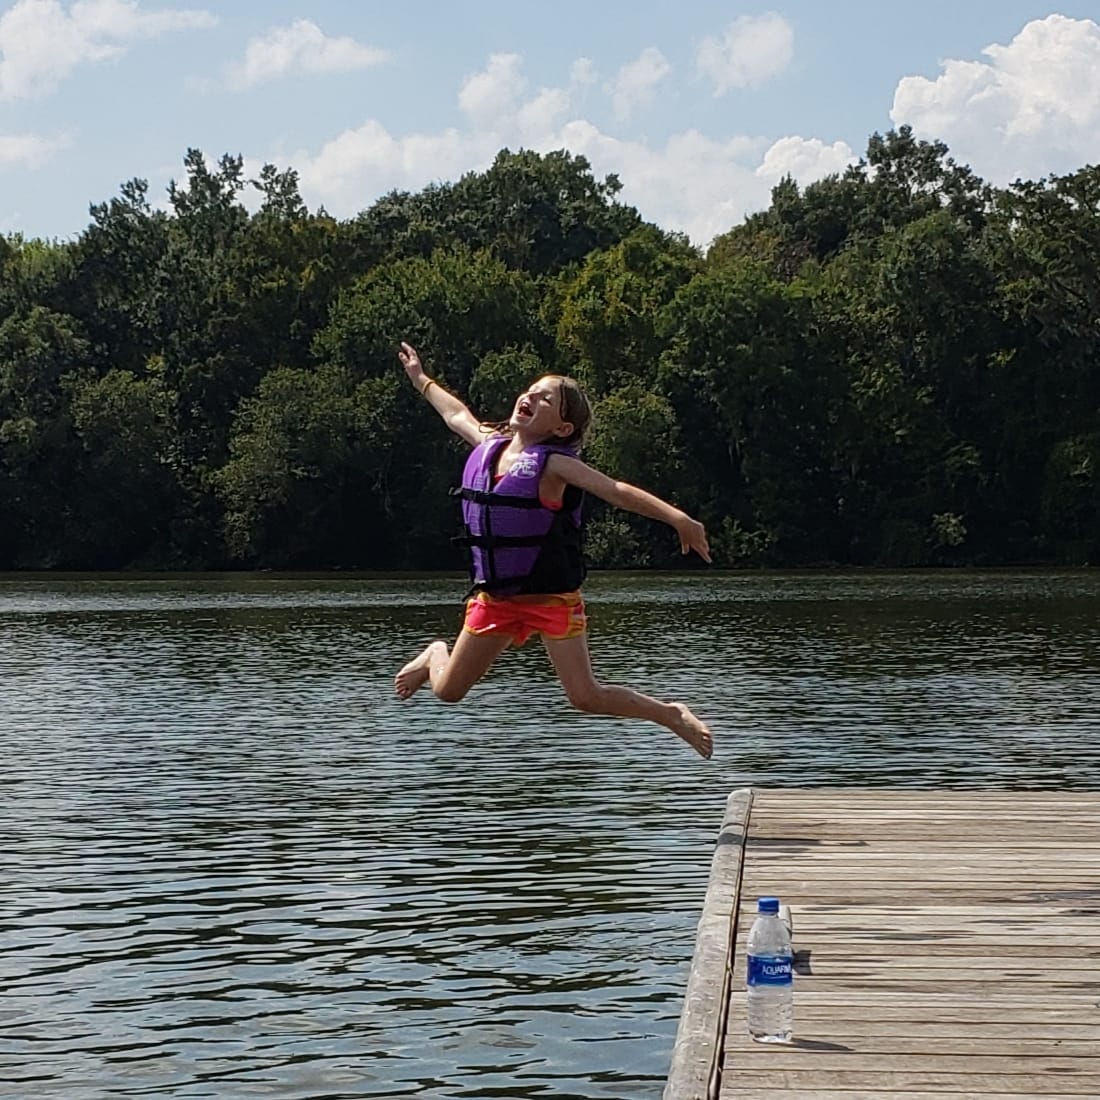 Jumping in the lake